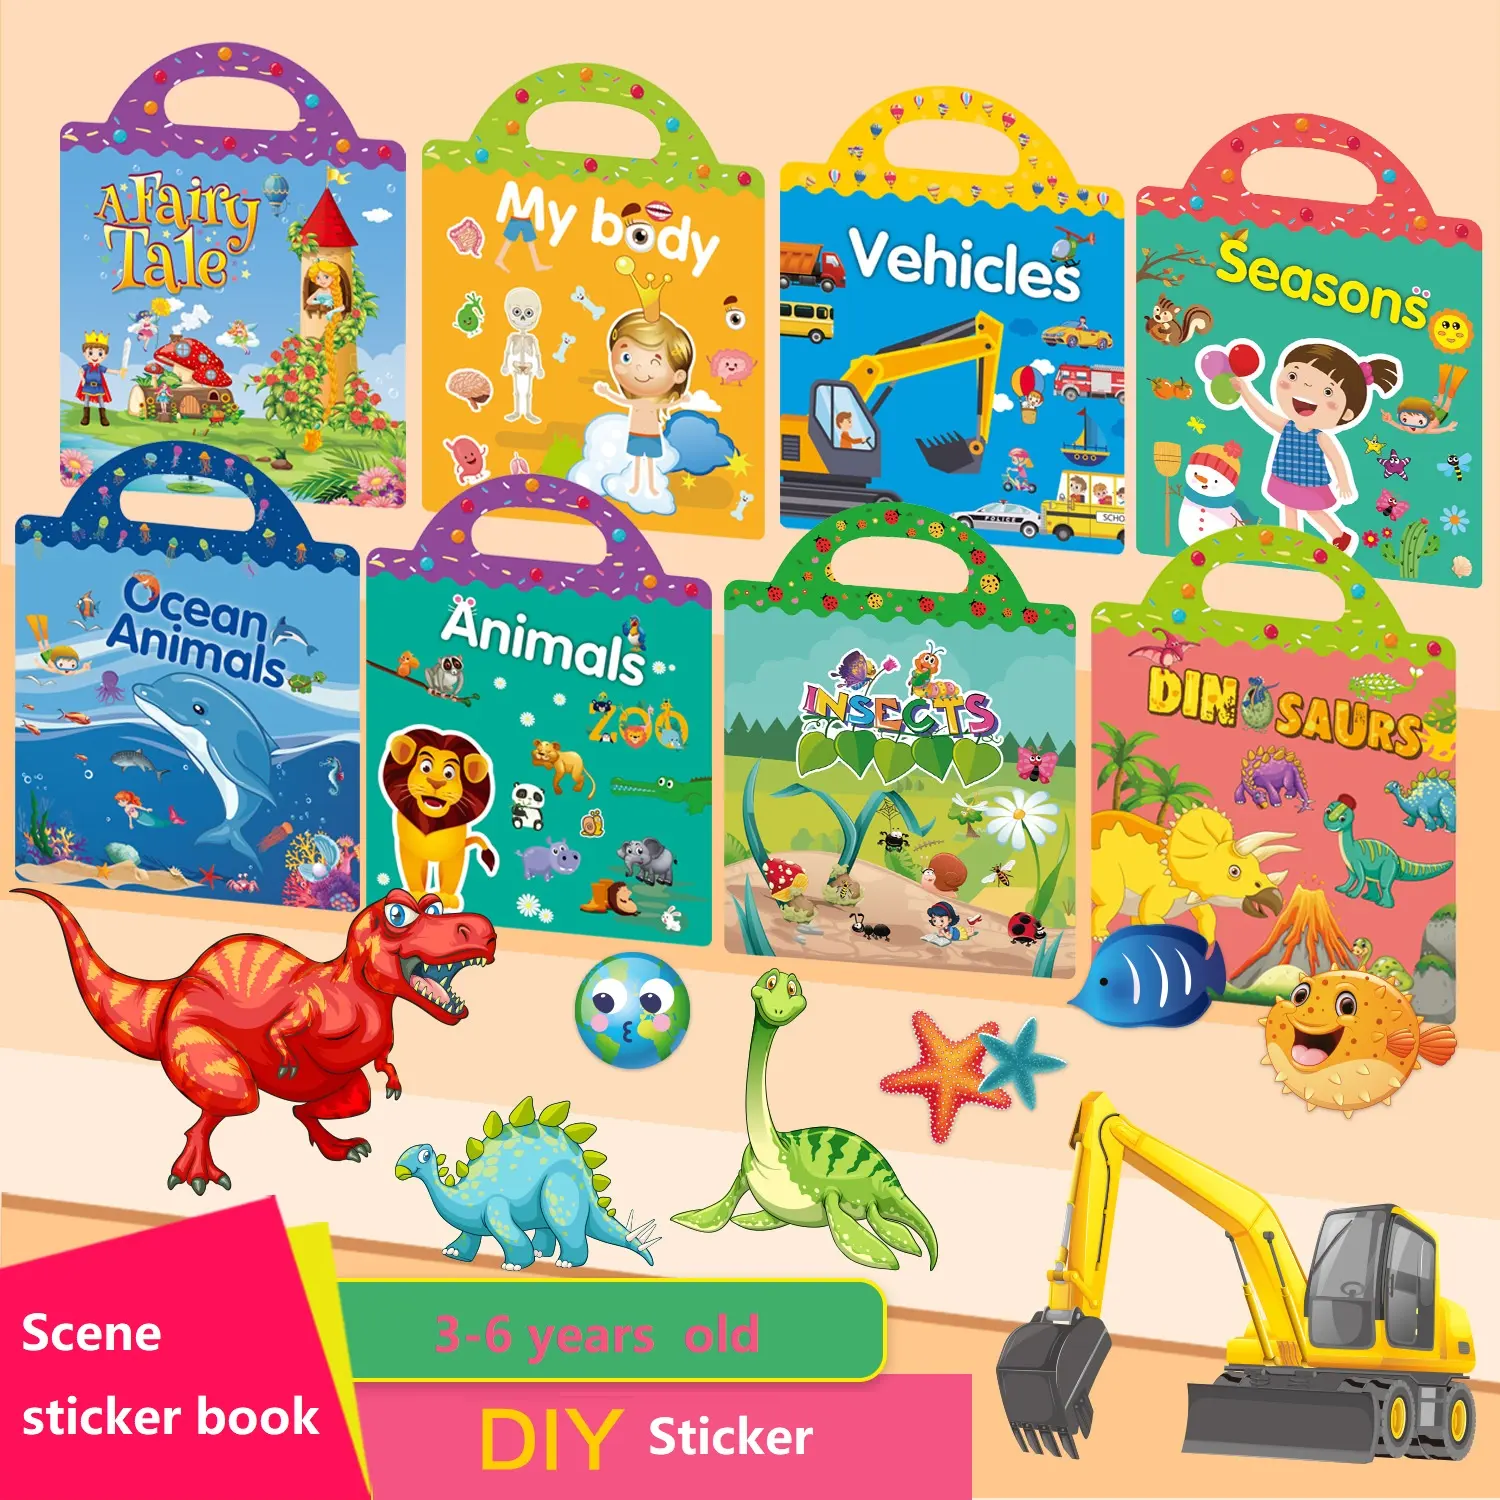 custom printing service 15 designs sticker book for kids 2-4 Preschool Education Learning Toy reusable sticker book